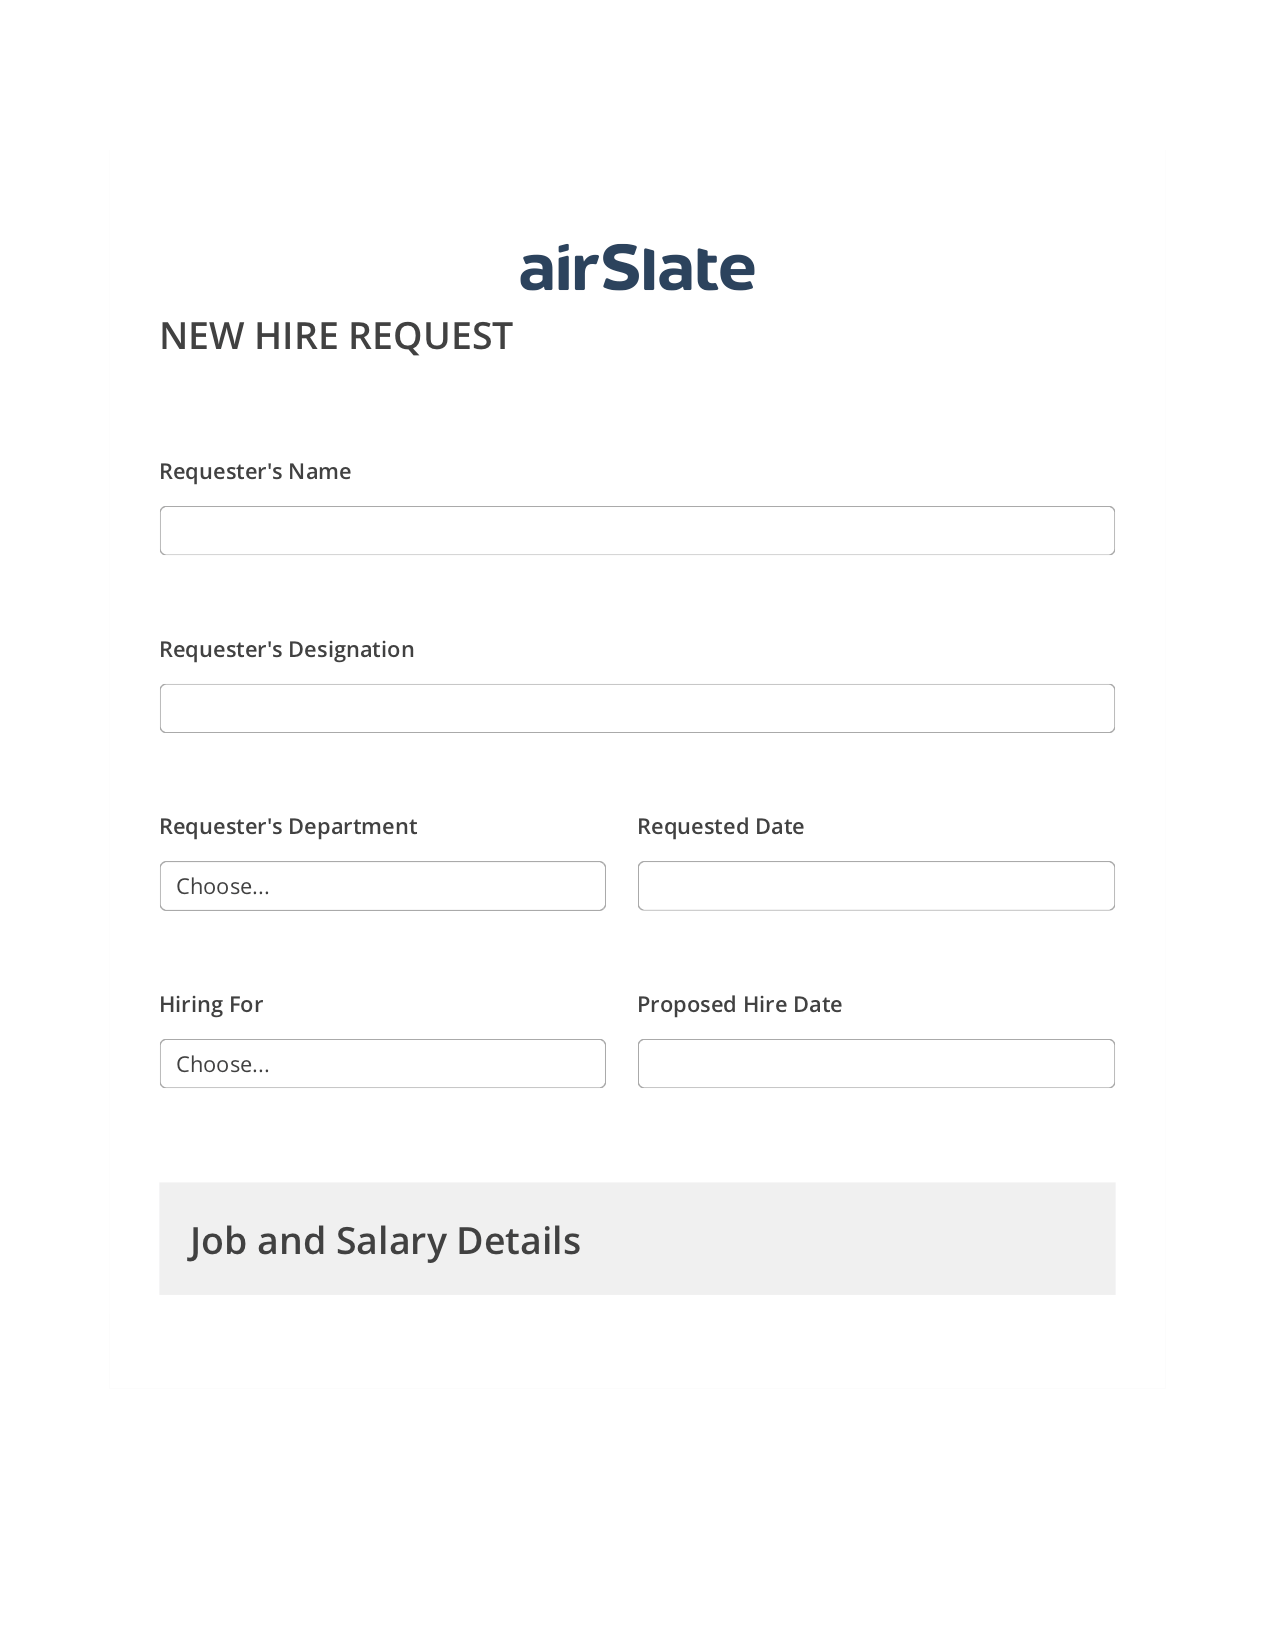 Hiring Request Workflow Prefill from NetSuite records, Jira Bot, Archive to SharePoint Folder Bot